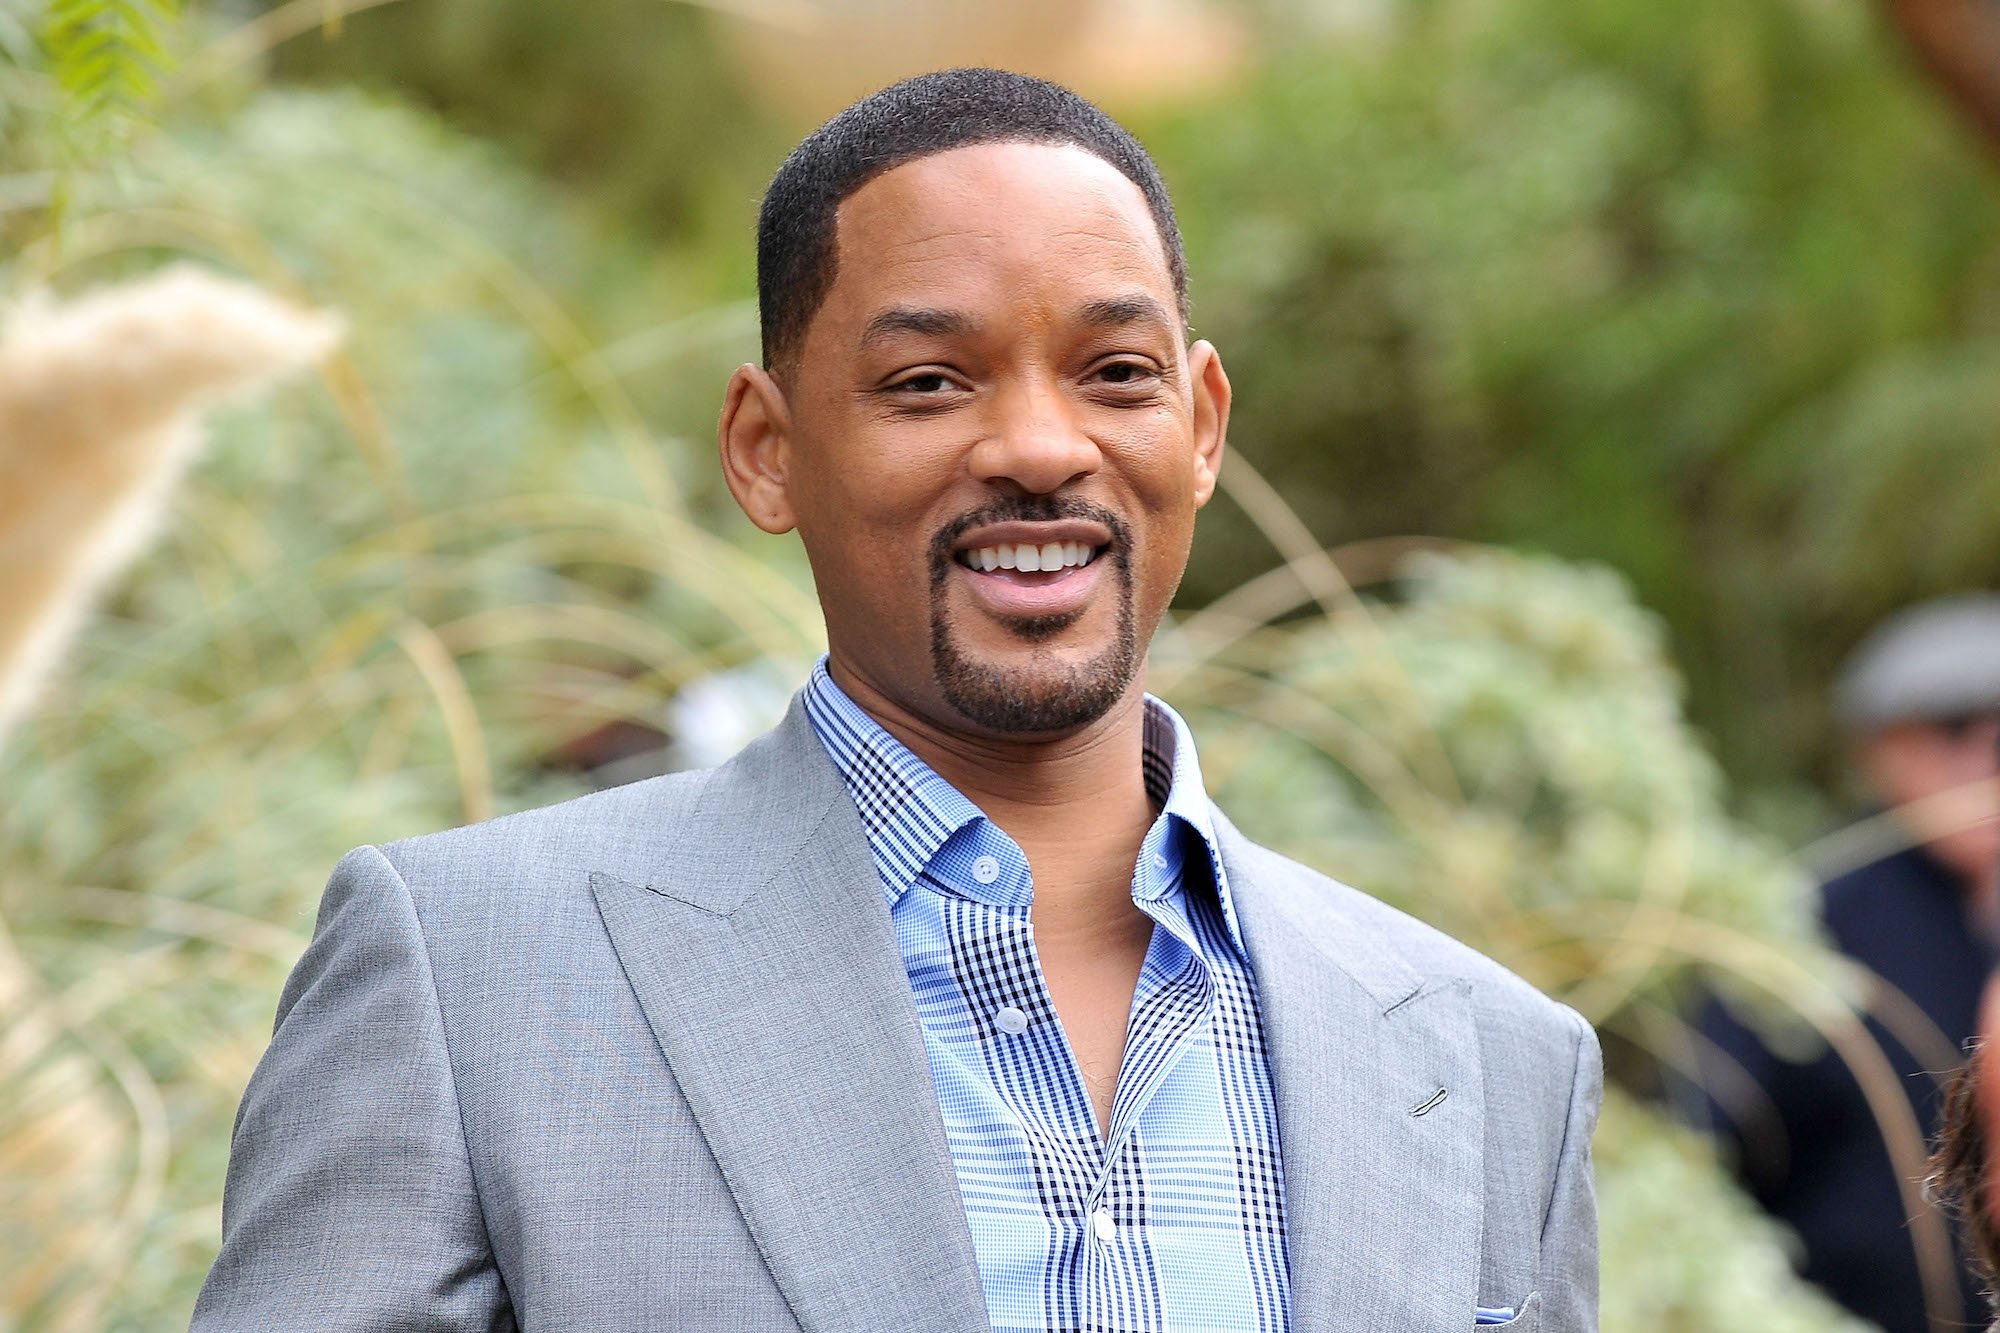 Will Smith’s Music Career Is Underrated, According to ‘Fresh Prince’ Co-Star Tatyana Ali